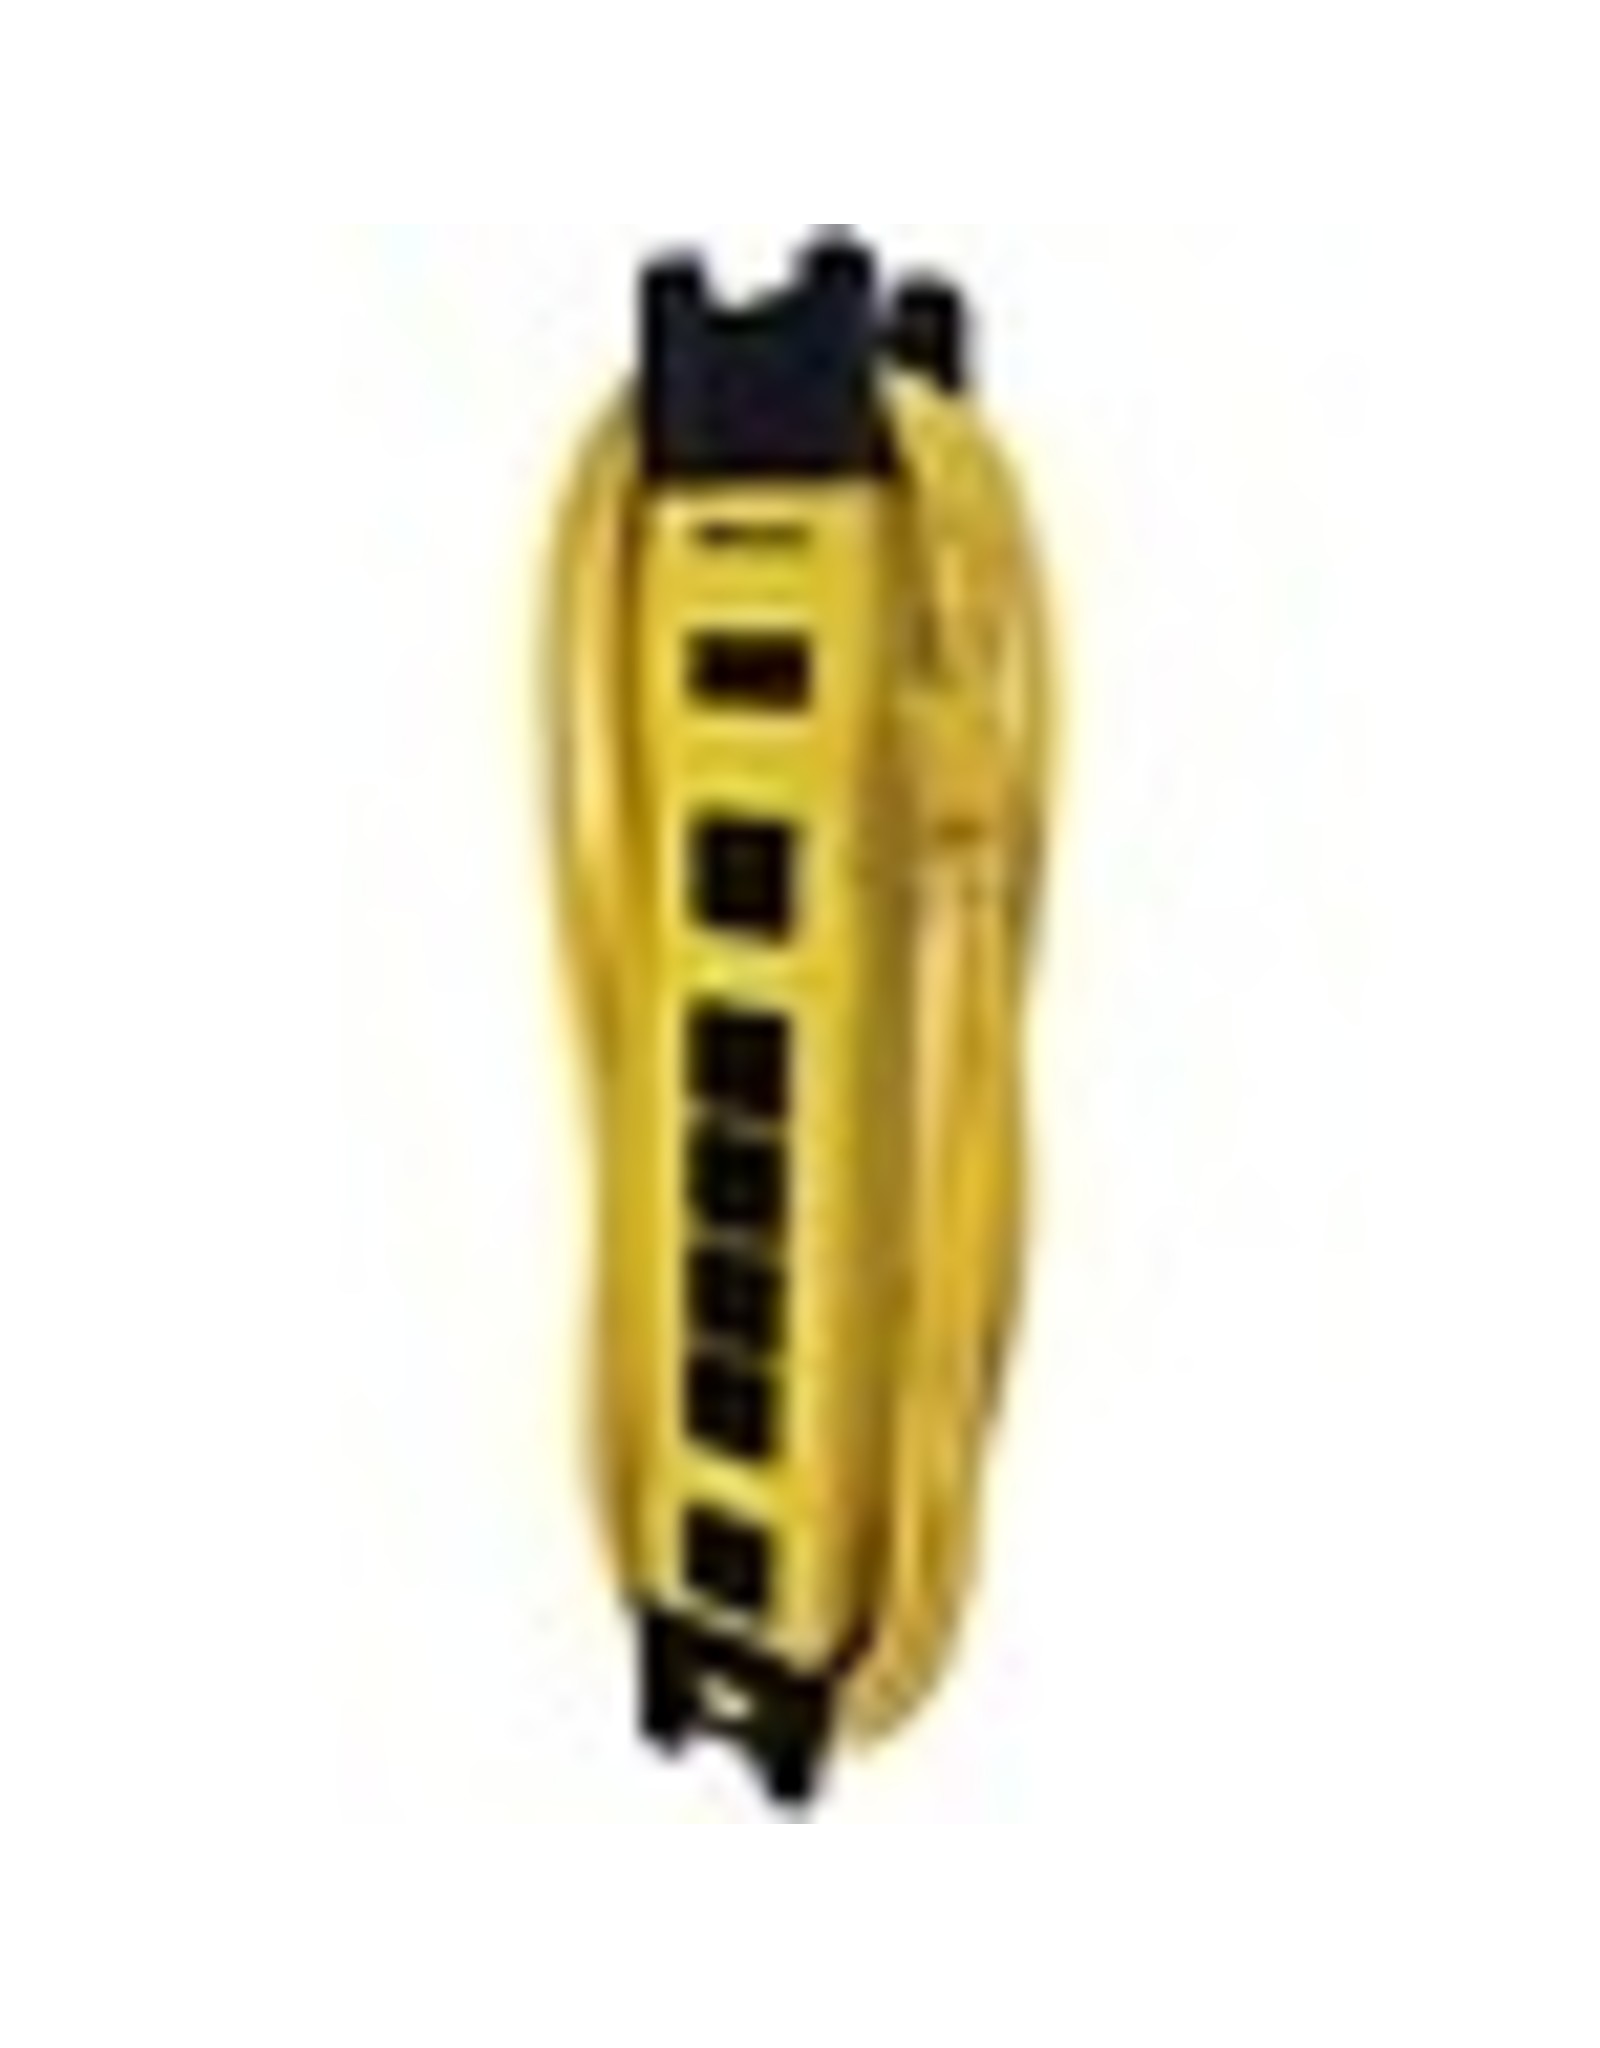 POWER STRIP 6-OUTLET 10' CORD